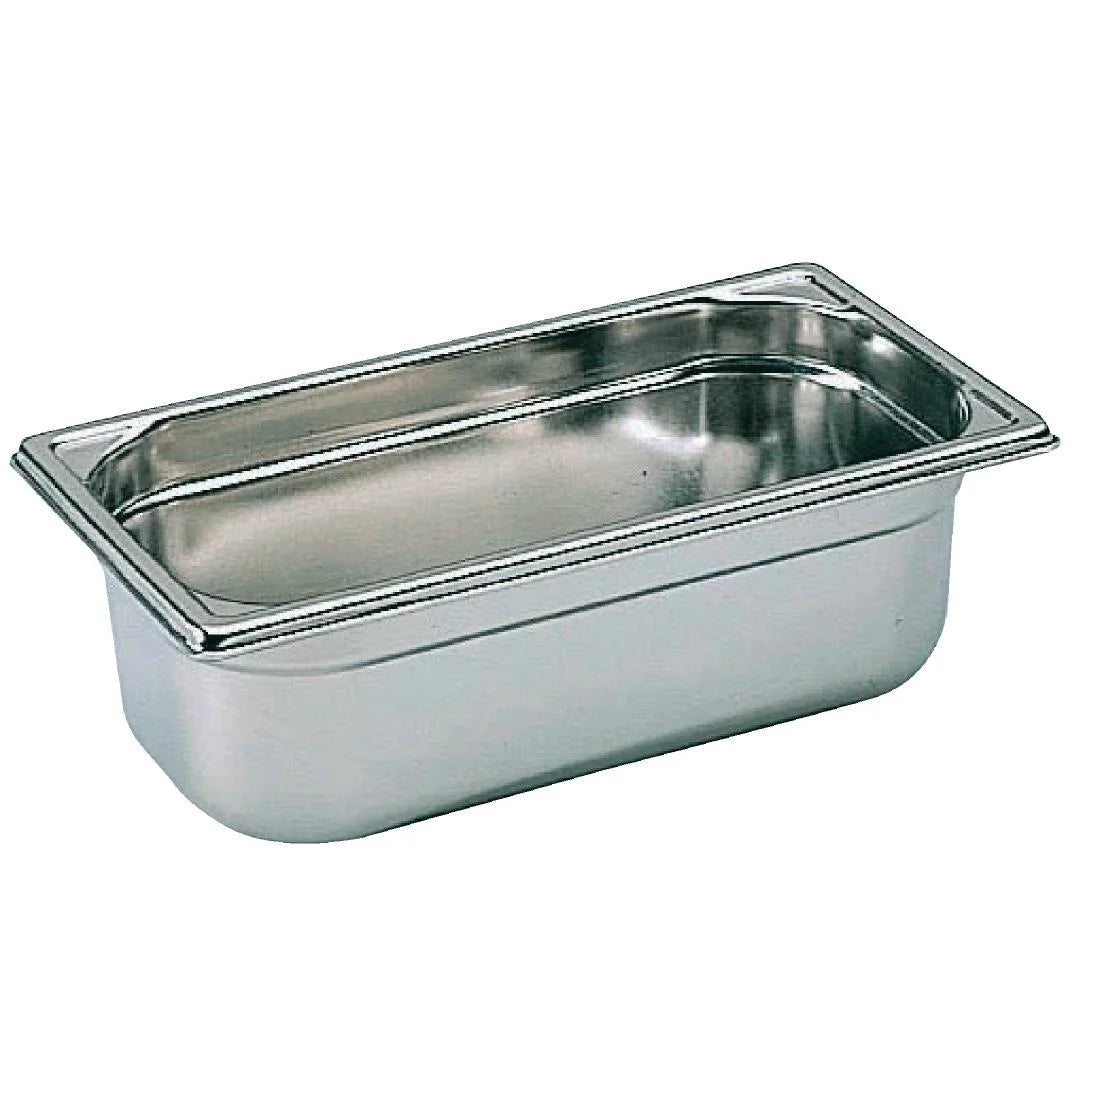 Bourgeat Stainless Steel 1/3 Gastronorm Pan 65mm JD Catering Equipment Solutions Ltd